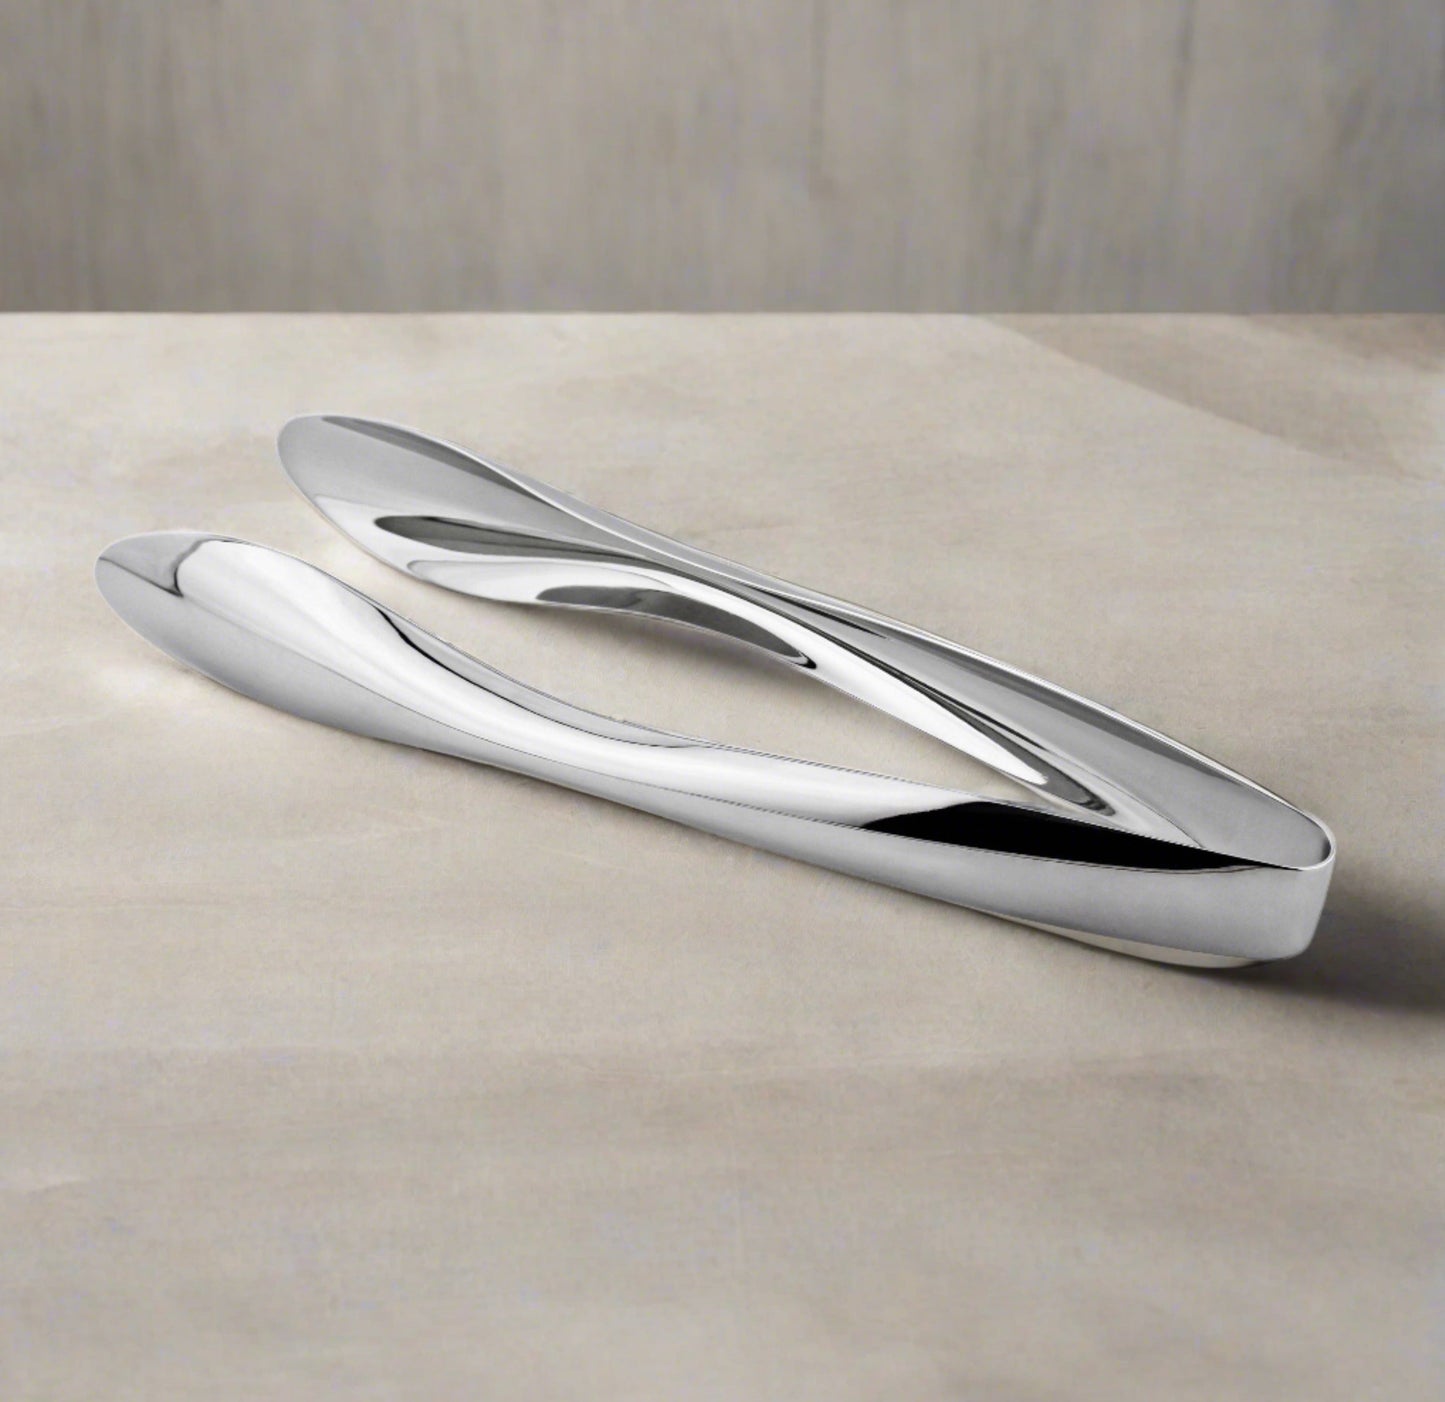 Cuisinox Serving Tong, available in 3 sizes